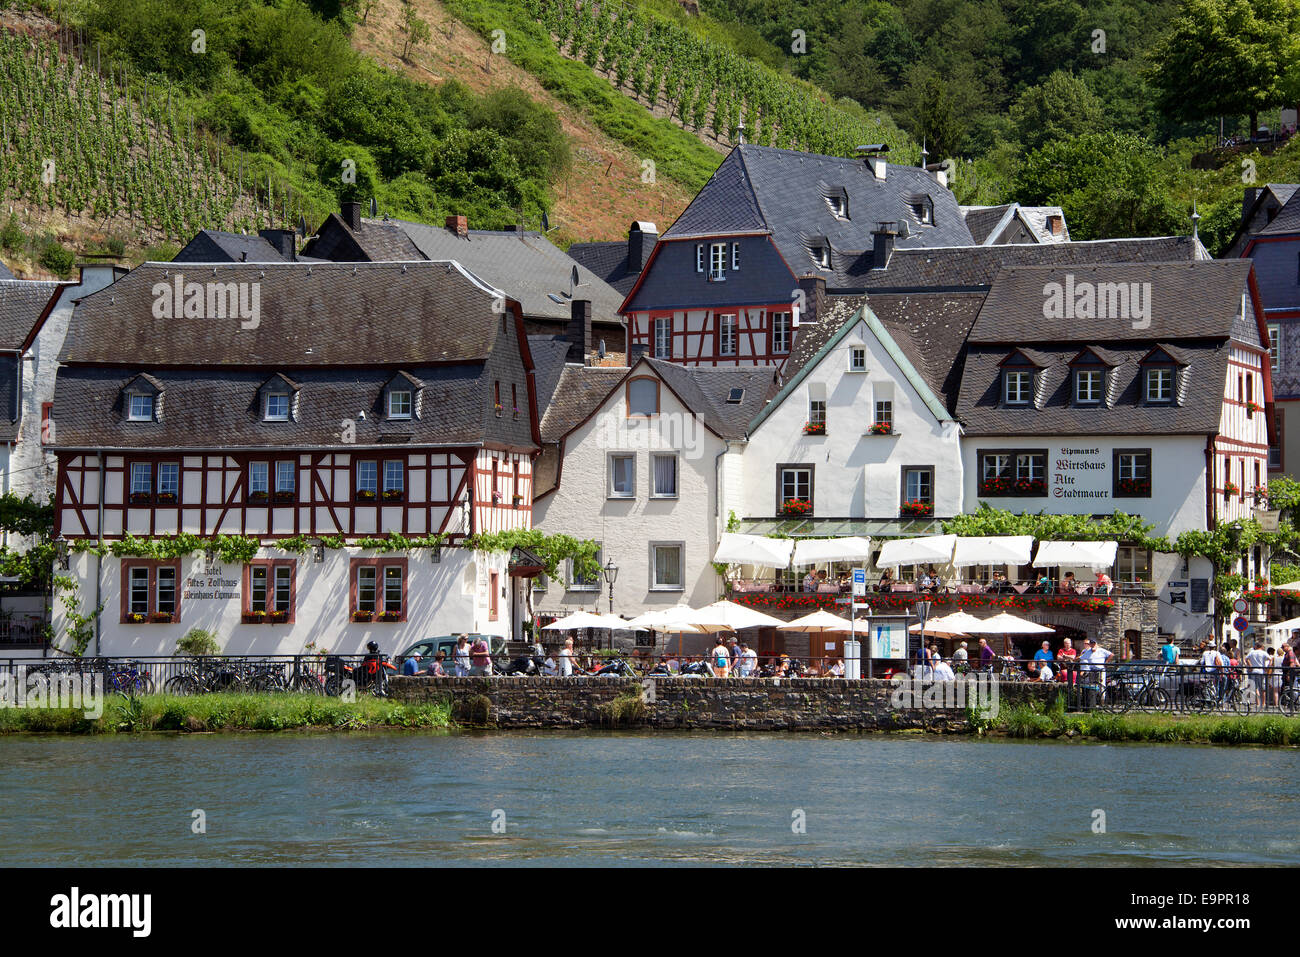 River front buildings medieval town of Beilstein Moselle River Moselle Valley Germany Stock Photo